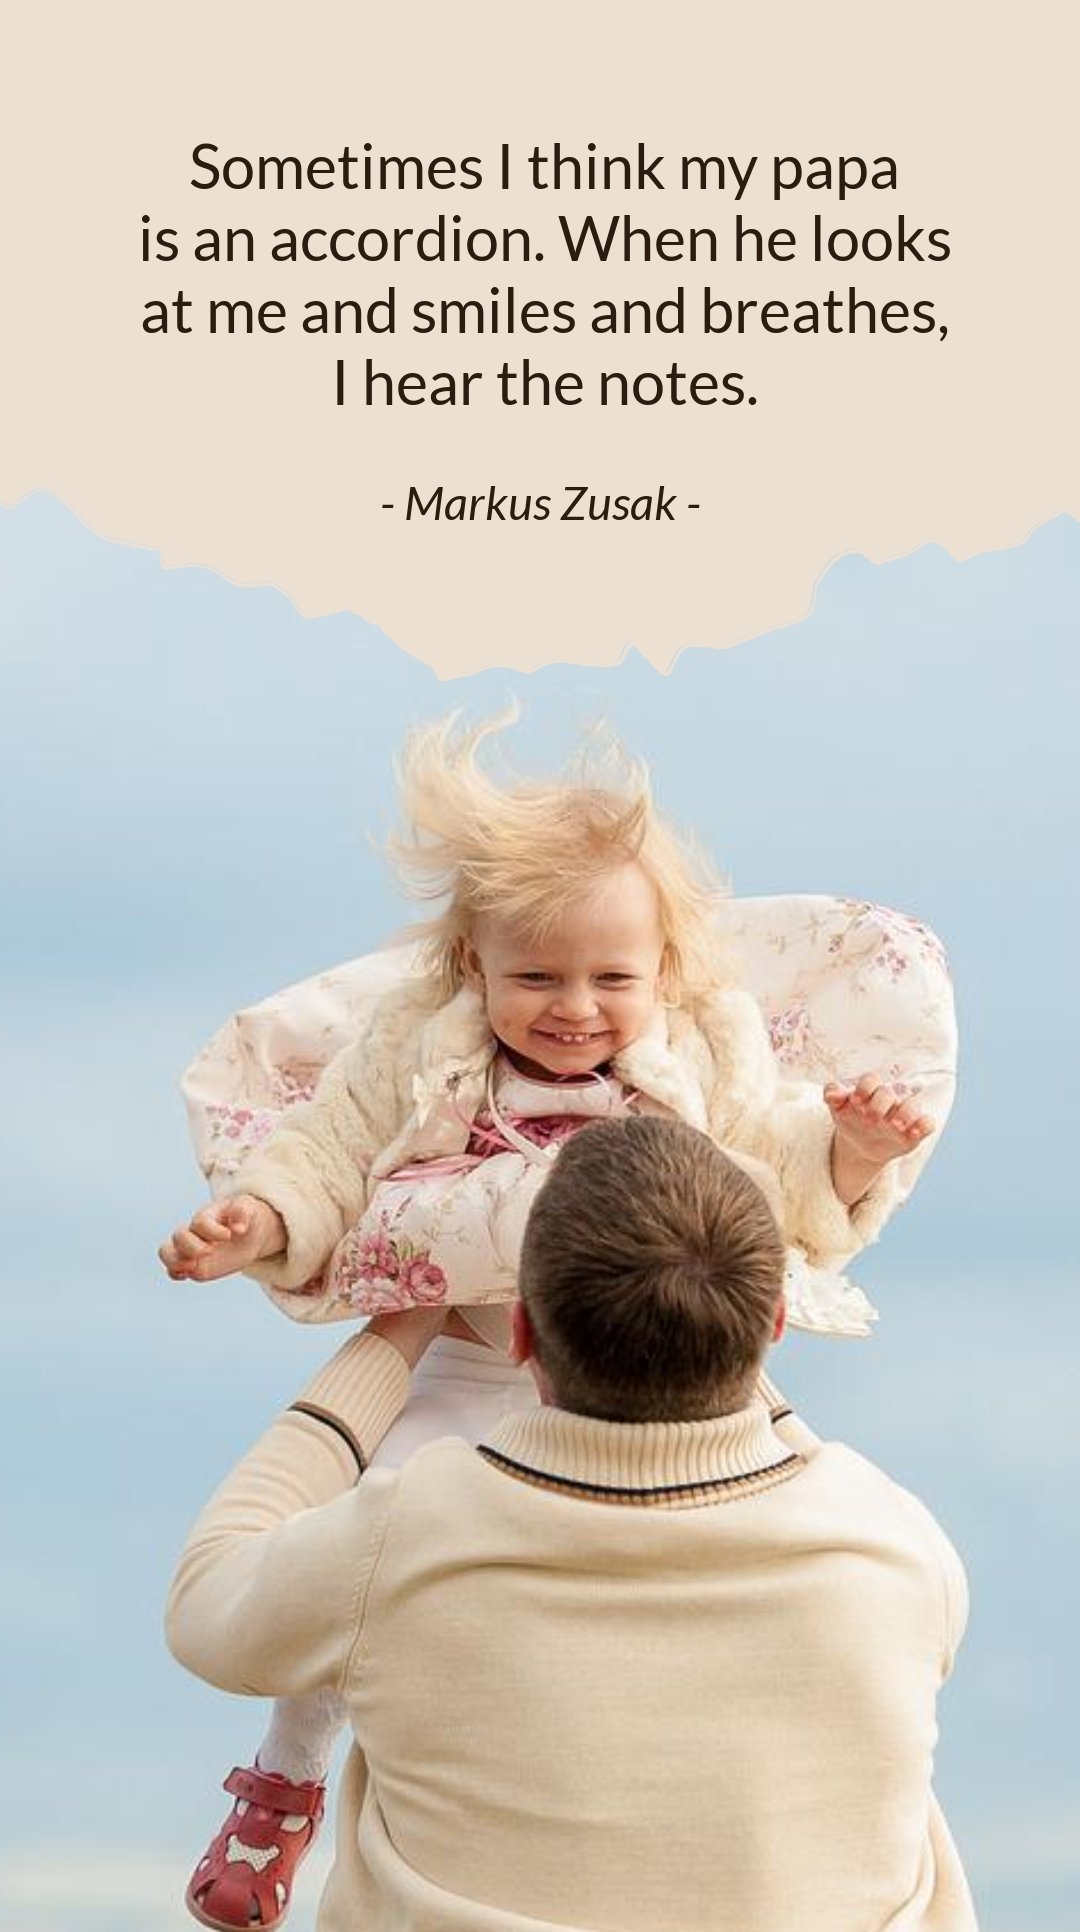 Markus Zusak - Sometimes I think my papa is an accordion. When he looks at me and smiles and breathes, I hear the notes.